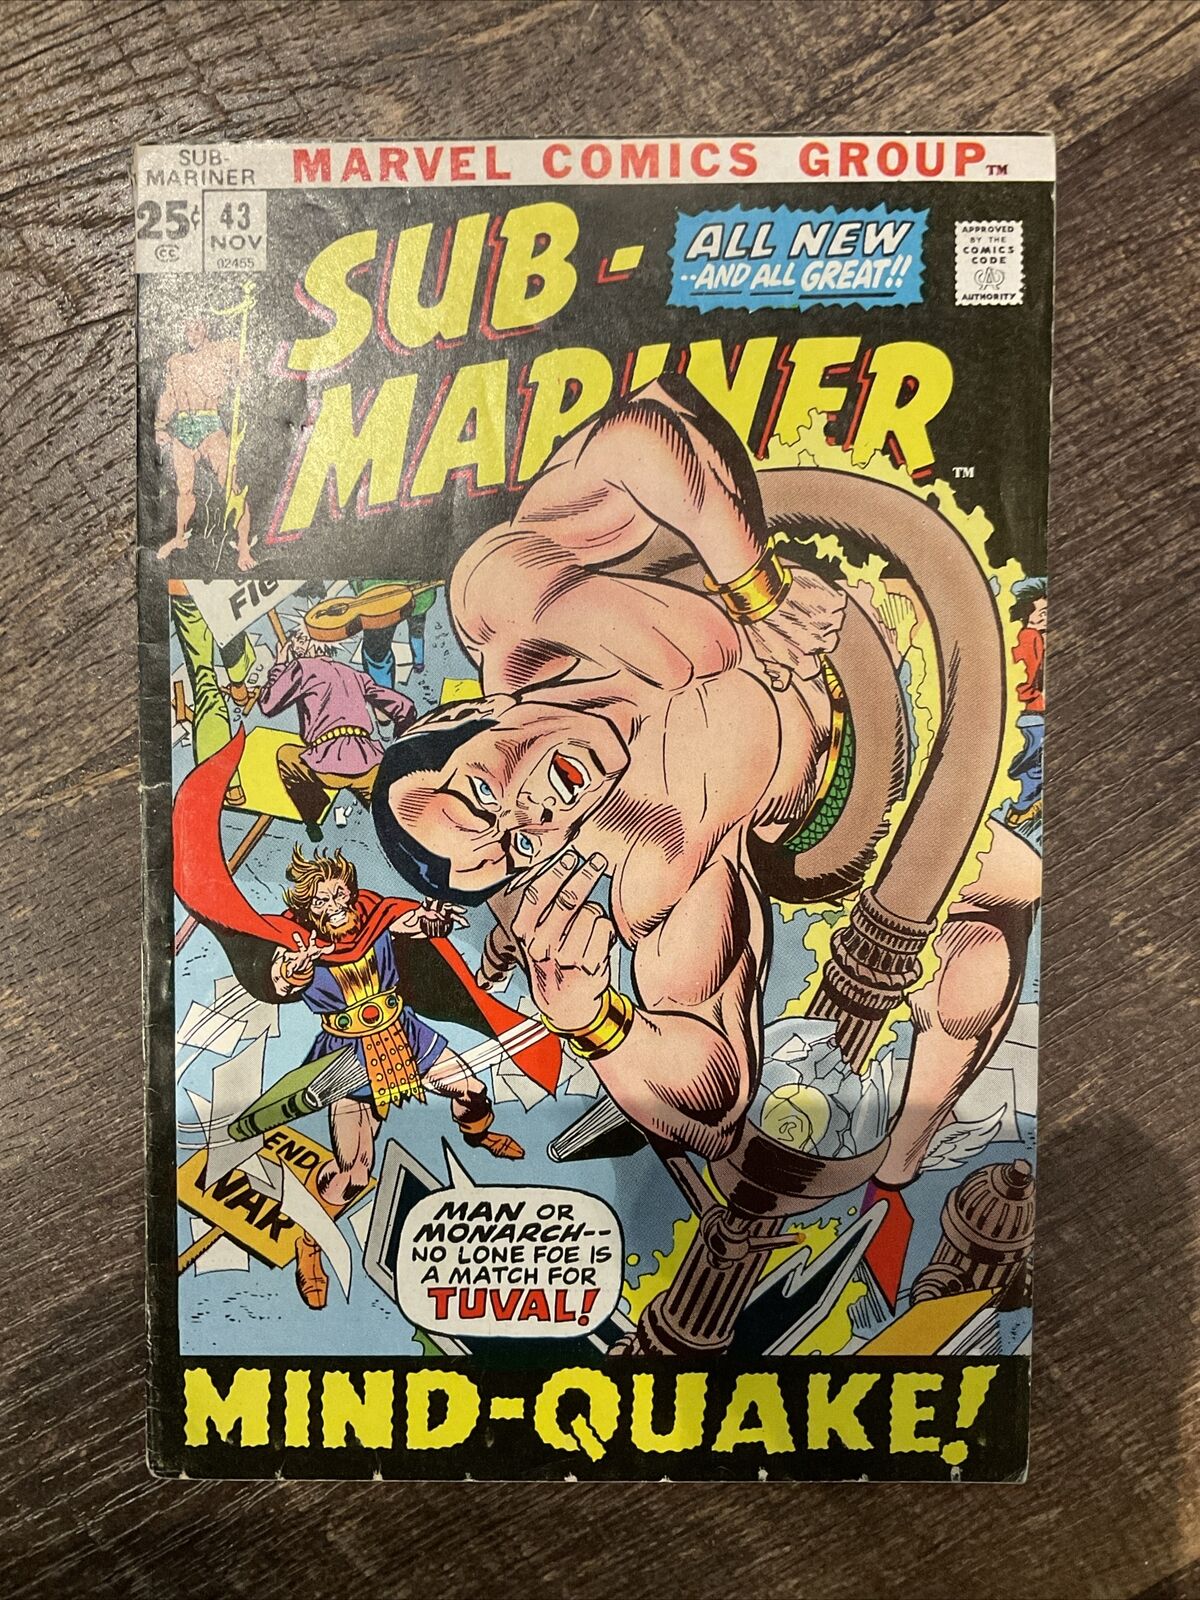 SUB-MARINER #43 (1971) 1st TUVAL GERRY CONWAY, GENE COLAN, MARVEL COMICS GROUP